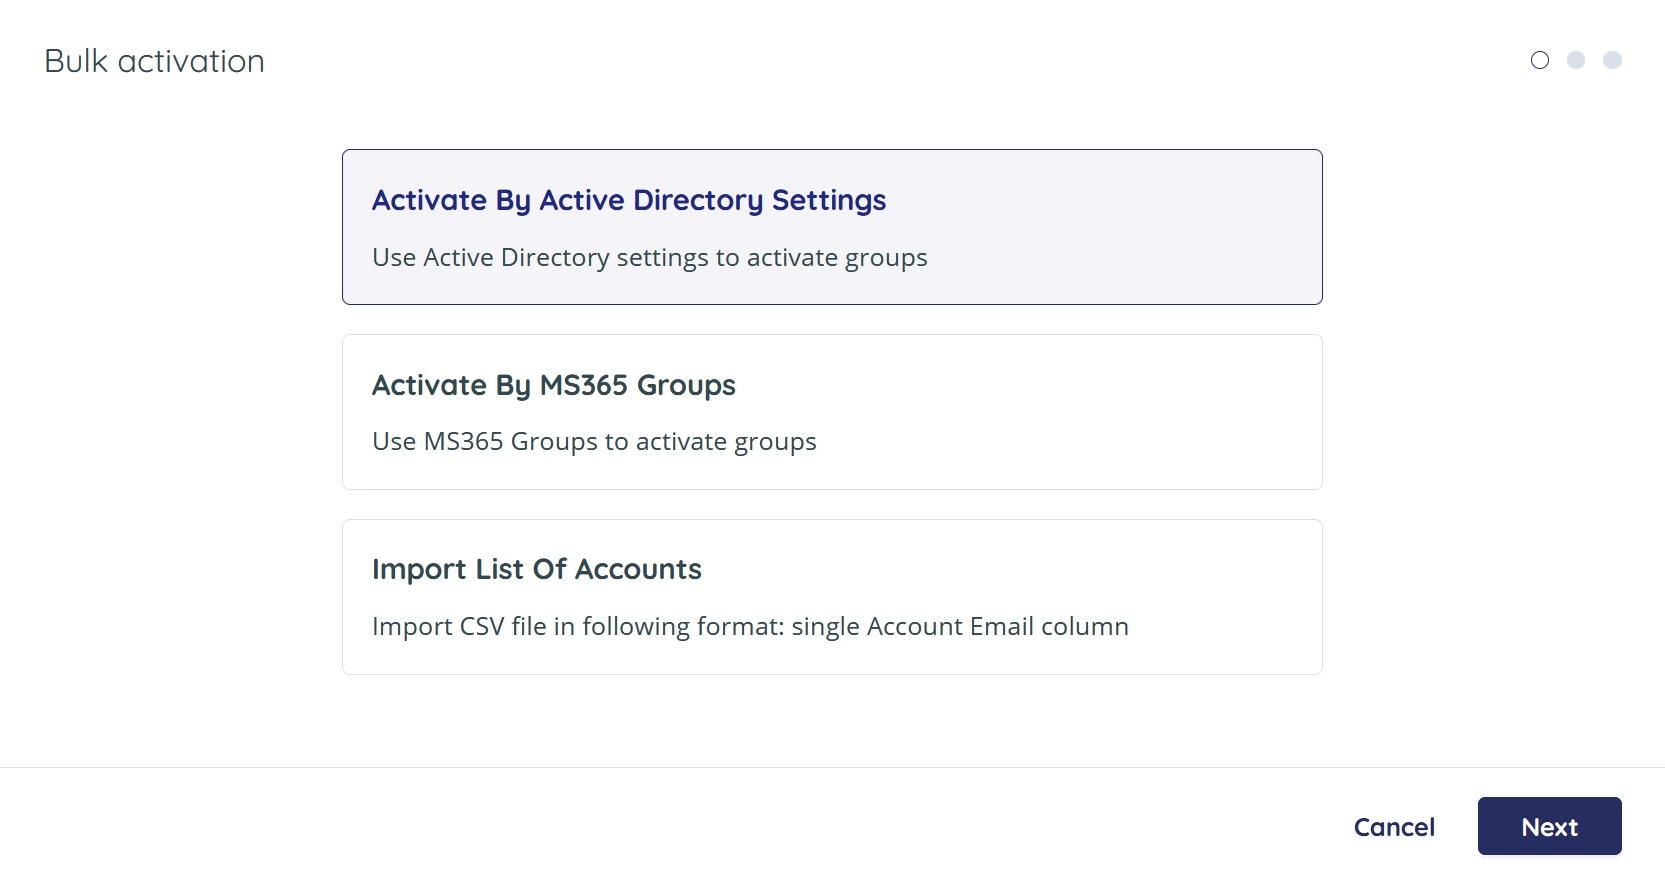 Activation using Active Directory